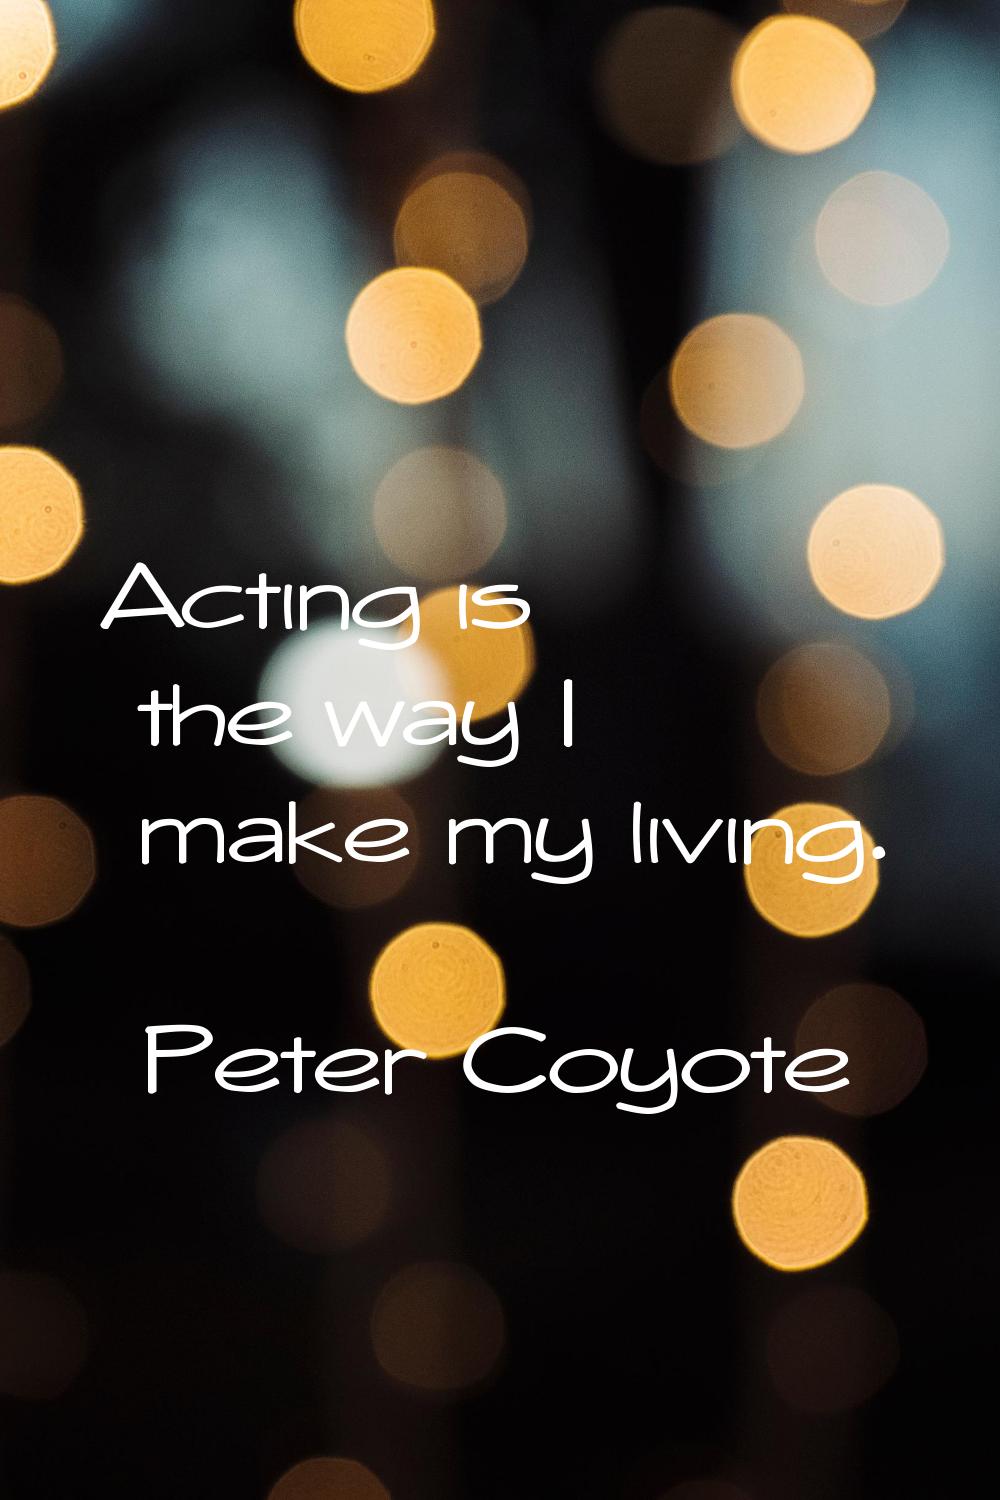 Acting is the way I make my living.